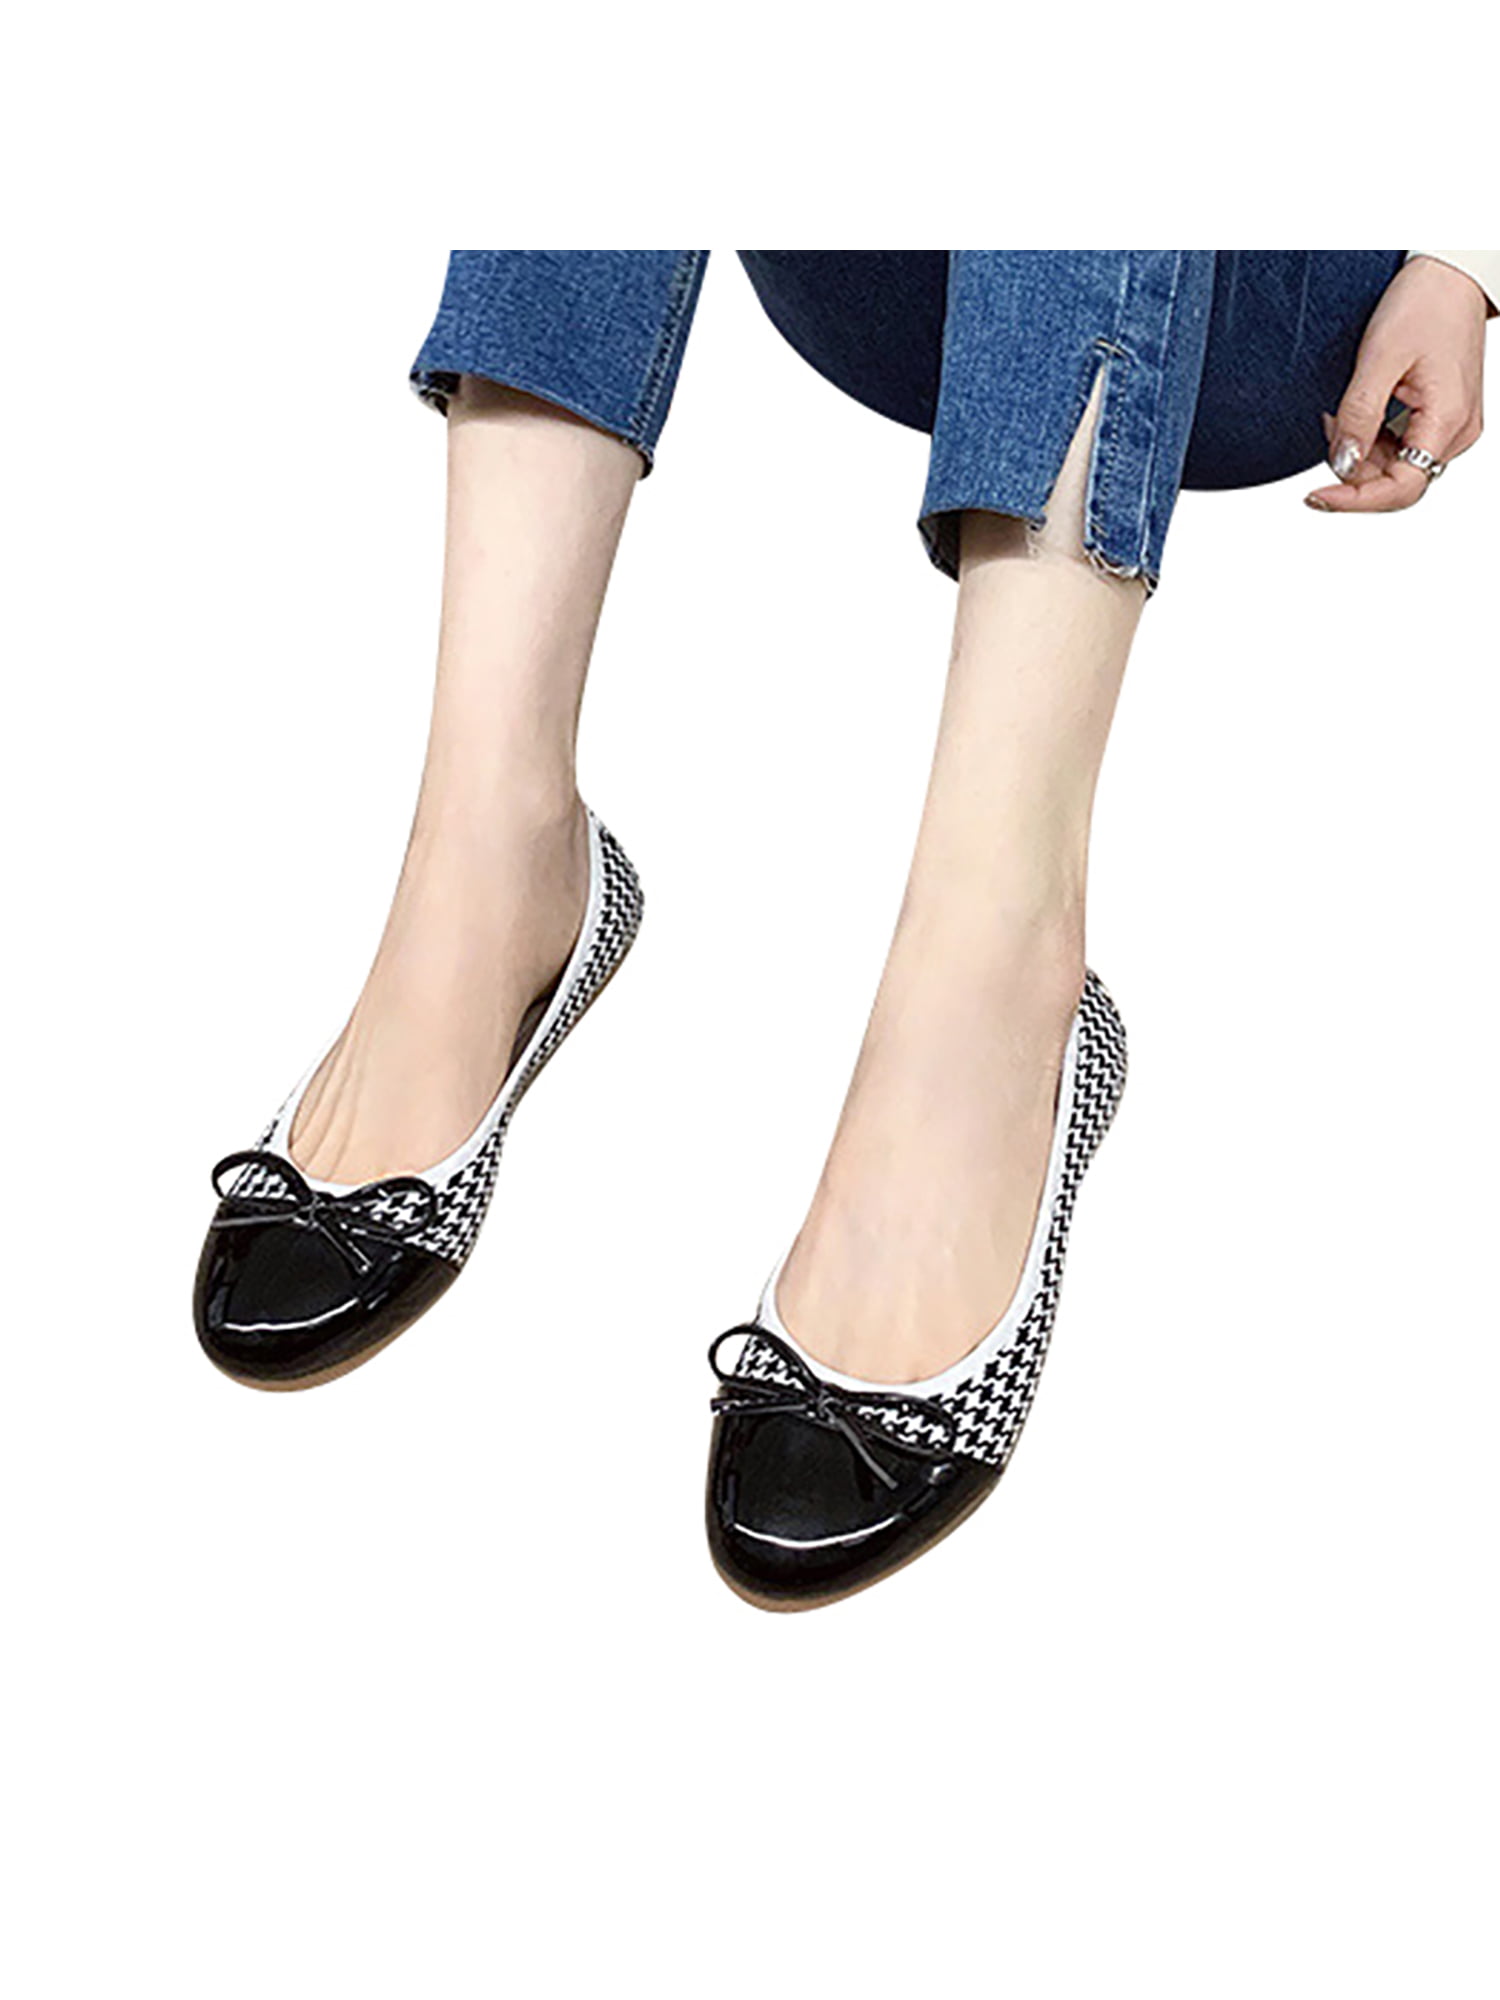 Details about   Womens Point Toe Mary Janes Kitten Heel Bowknot Slip On casual dress party Shoes 